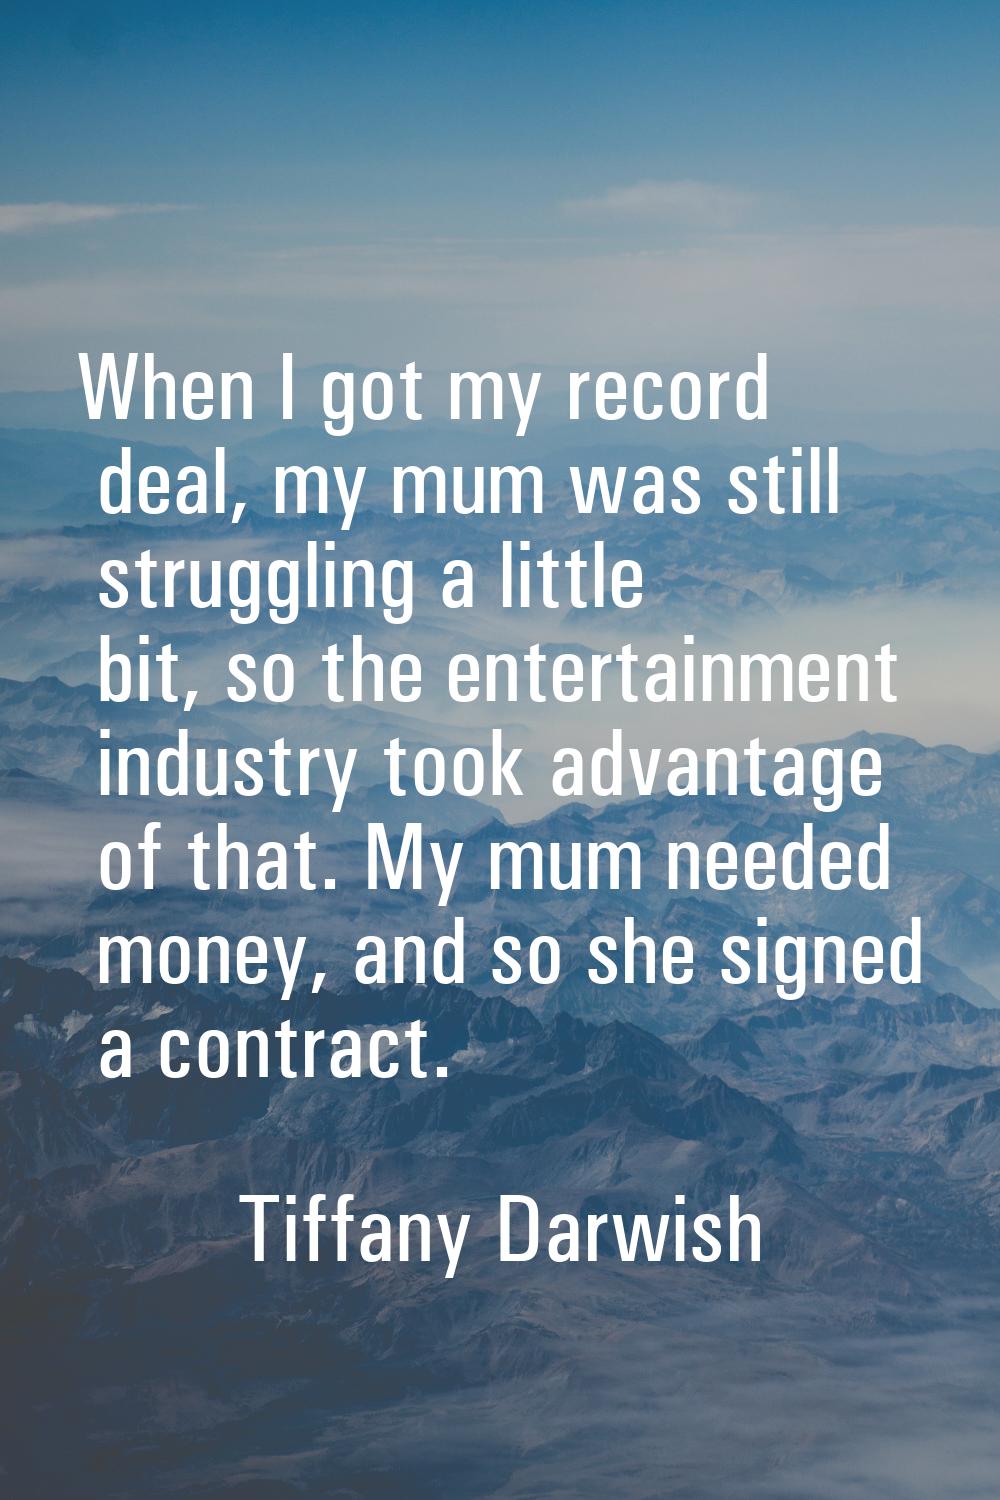 When I got my record deal, my mum was still struggling a little bit, so the entertainment industry 